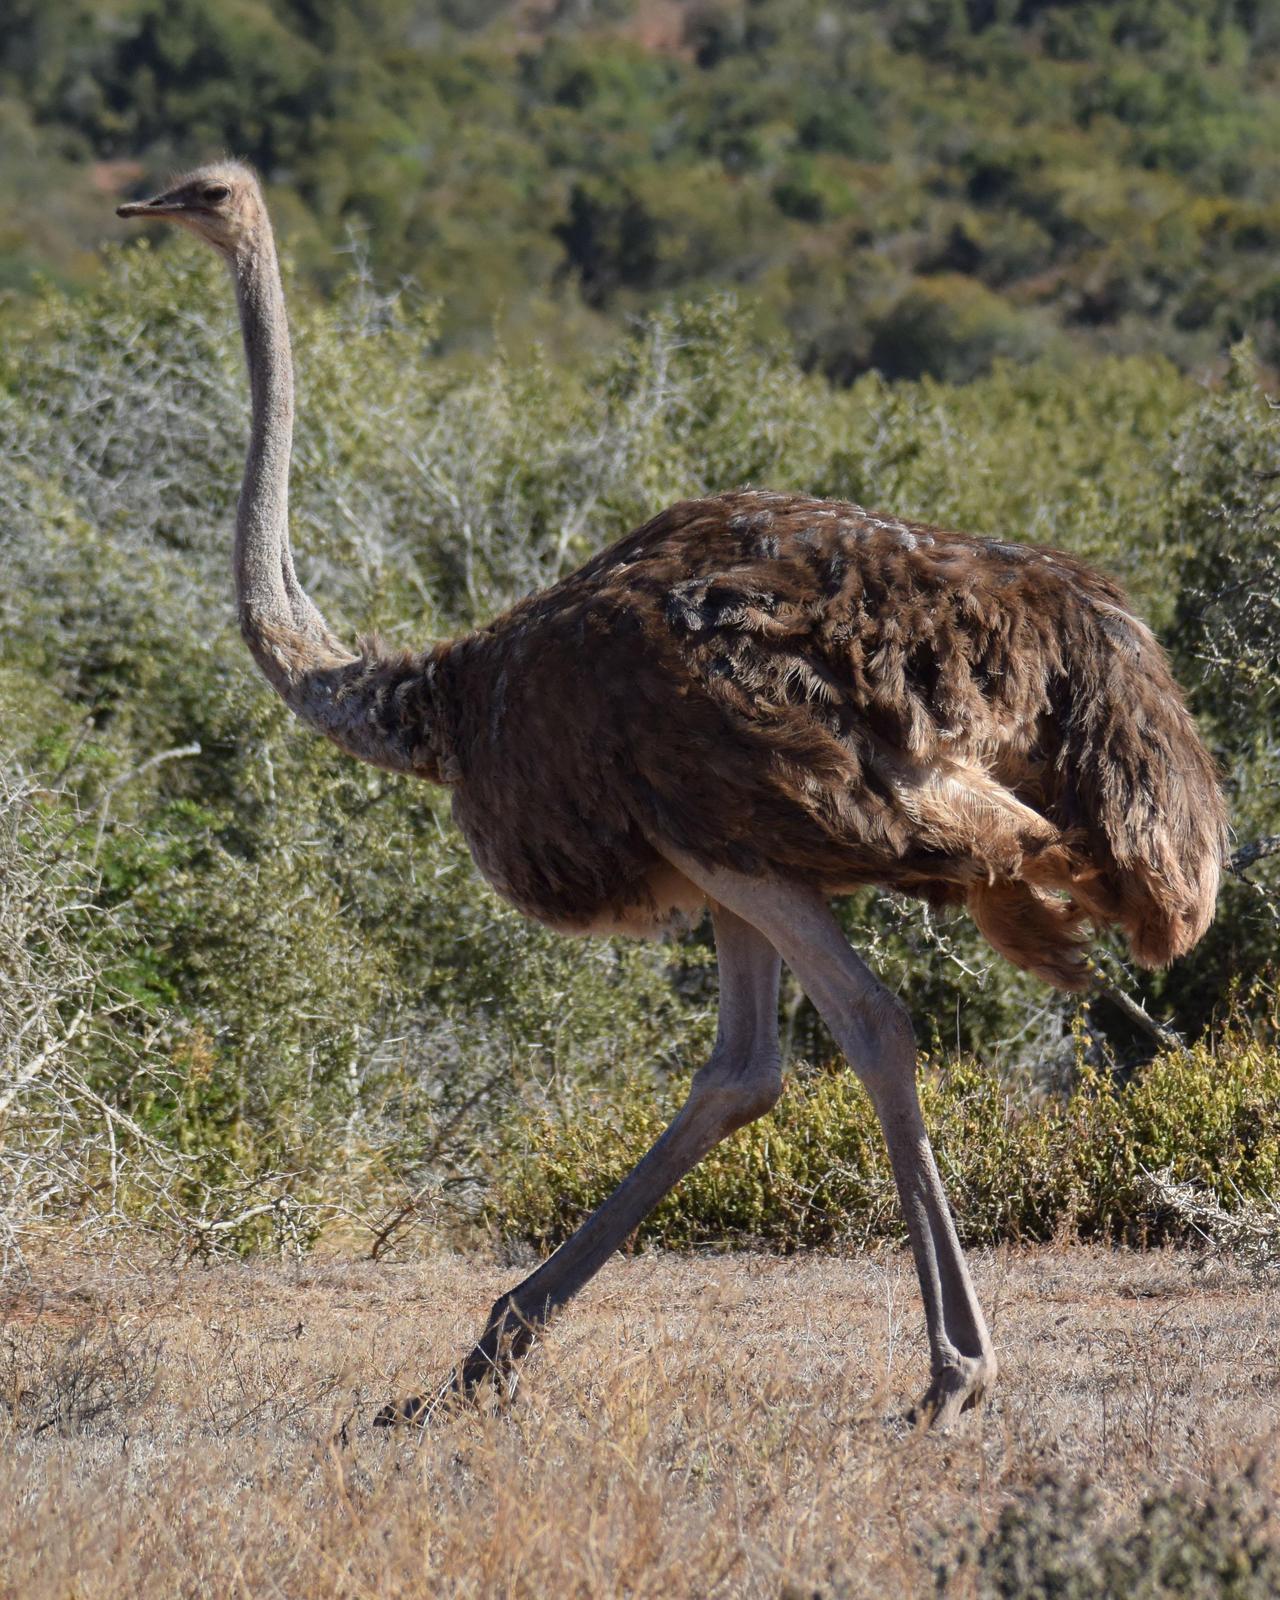 Common Ostrich Photo by Steve Percival